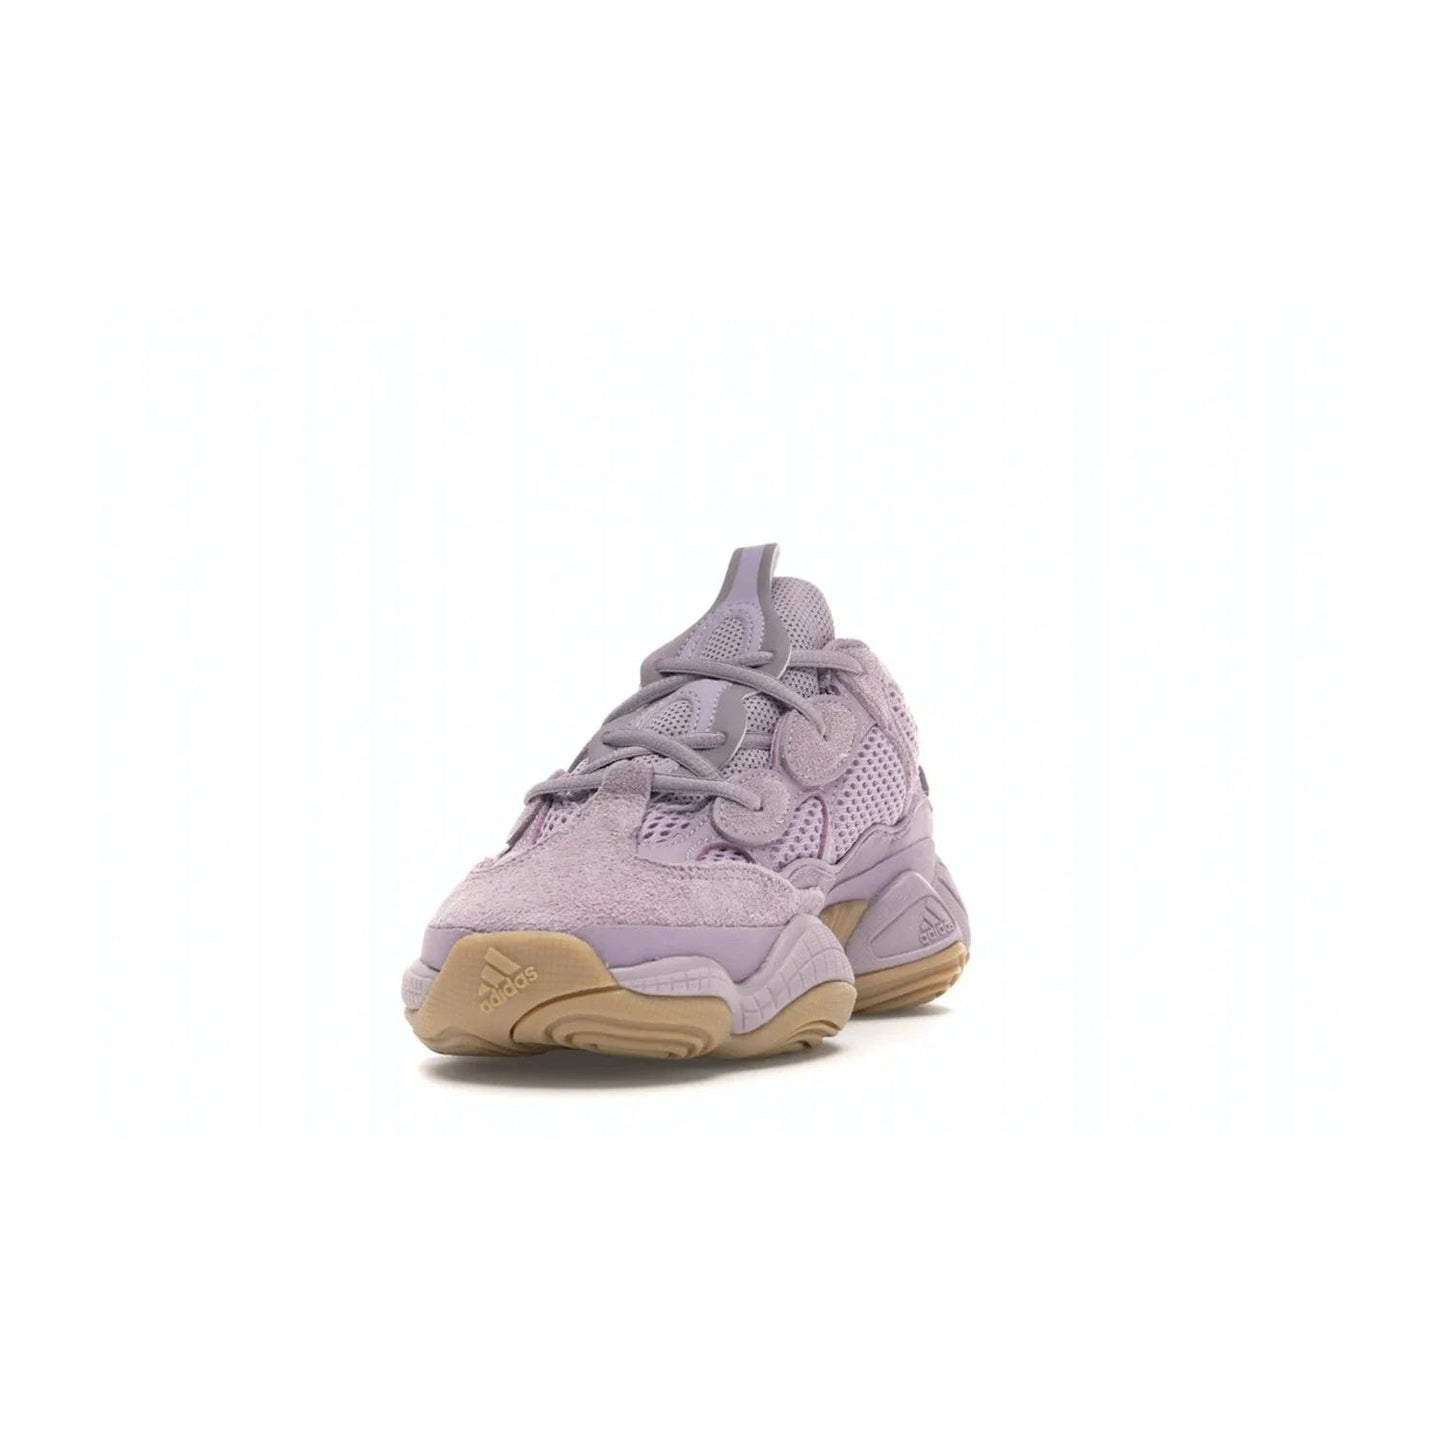 adidas Yeezy 500 Soft Vision - Image 12 - Only at www.BallersClubKickz.com - New adidas Yeezy 500 Soft Vision sneaker featuring a combination of mesh, leather, and suede in a classic Soft Vision colorway. Gum rubber outsole ensures durability and traction. An everyday sneaker that stands out from the crowd.